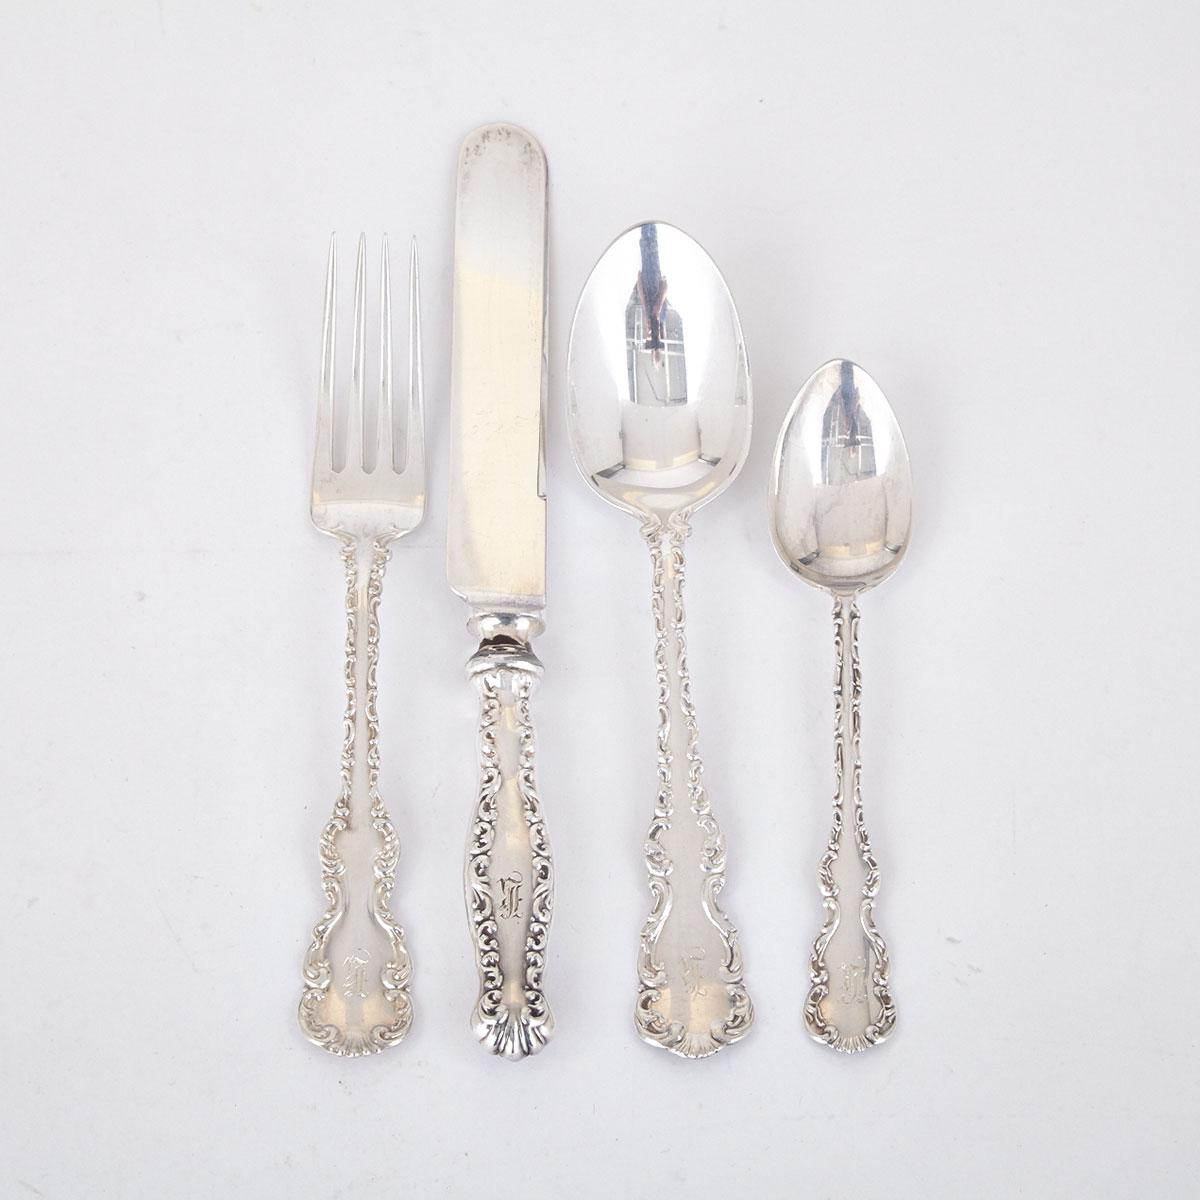 Assembled Canadian Silver ‘Louis XV’ Pattern Flatware Service, 20th century